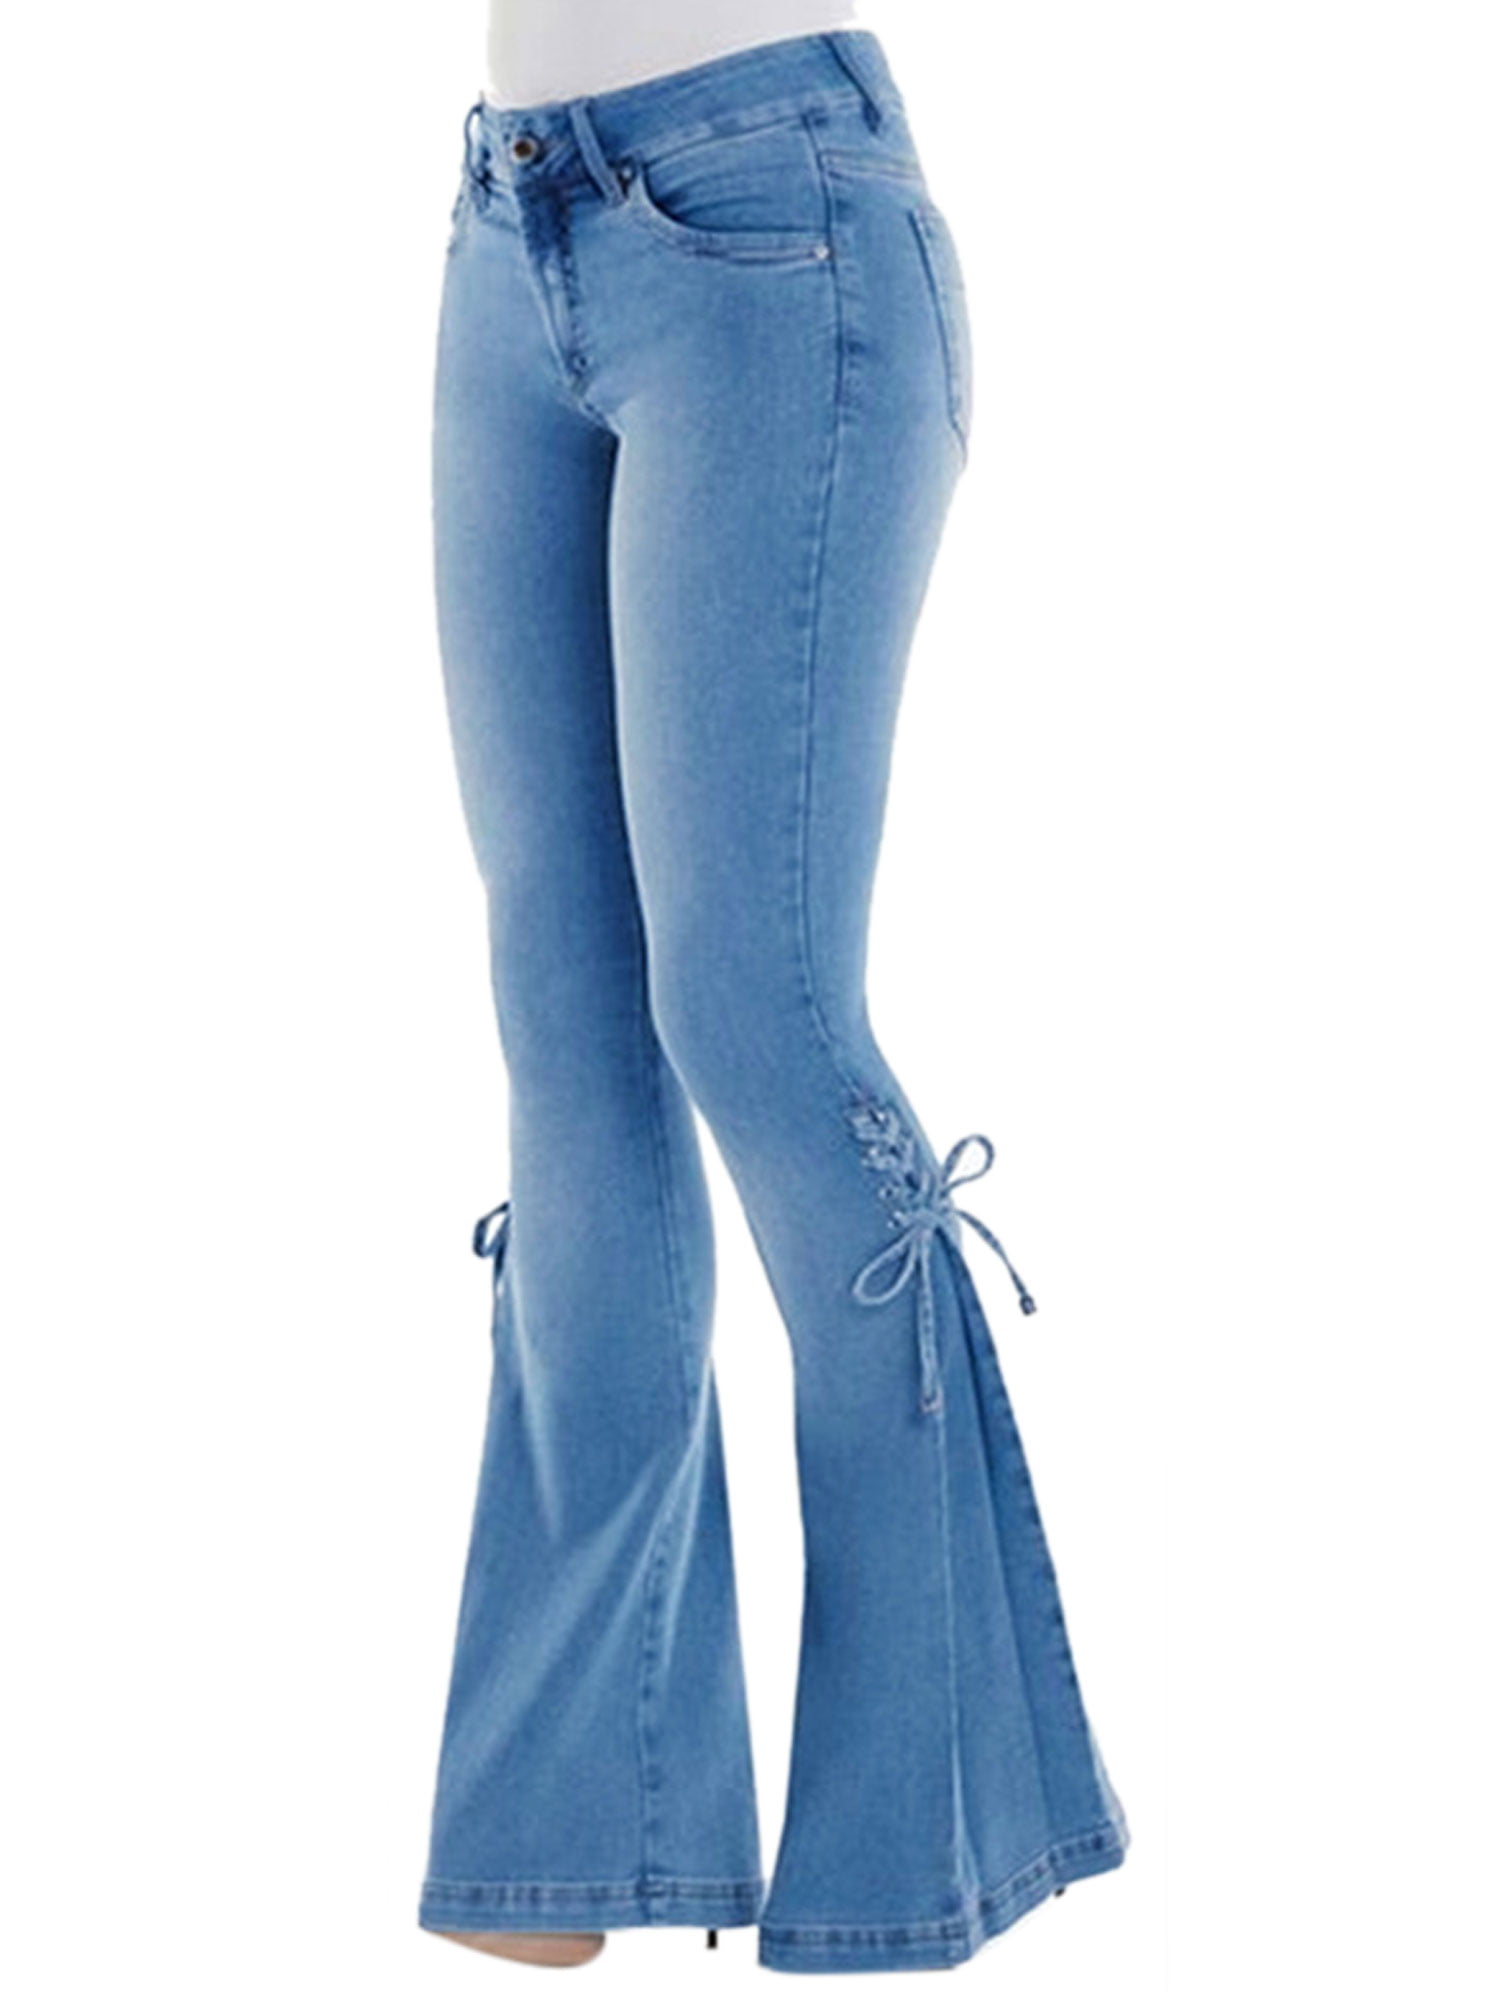 Womens Jeans Bows Lace Up High Waist Cute Denim Ankle Length Loose Summer Pants